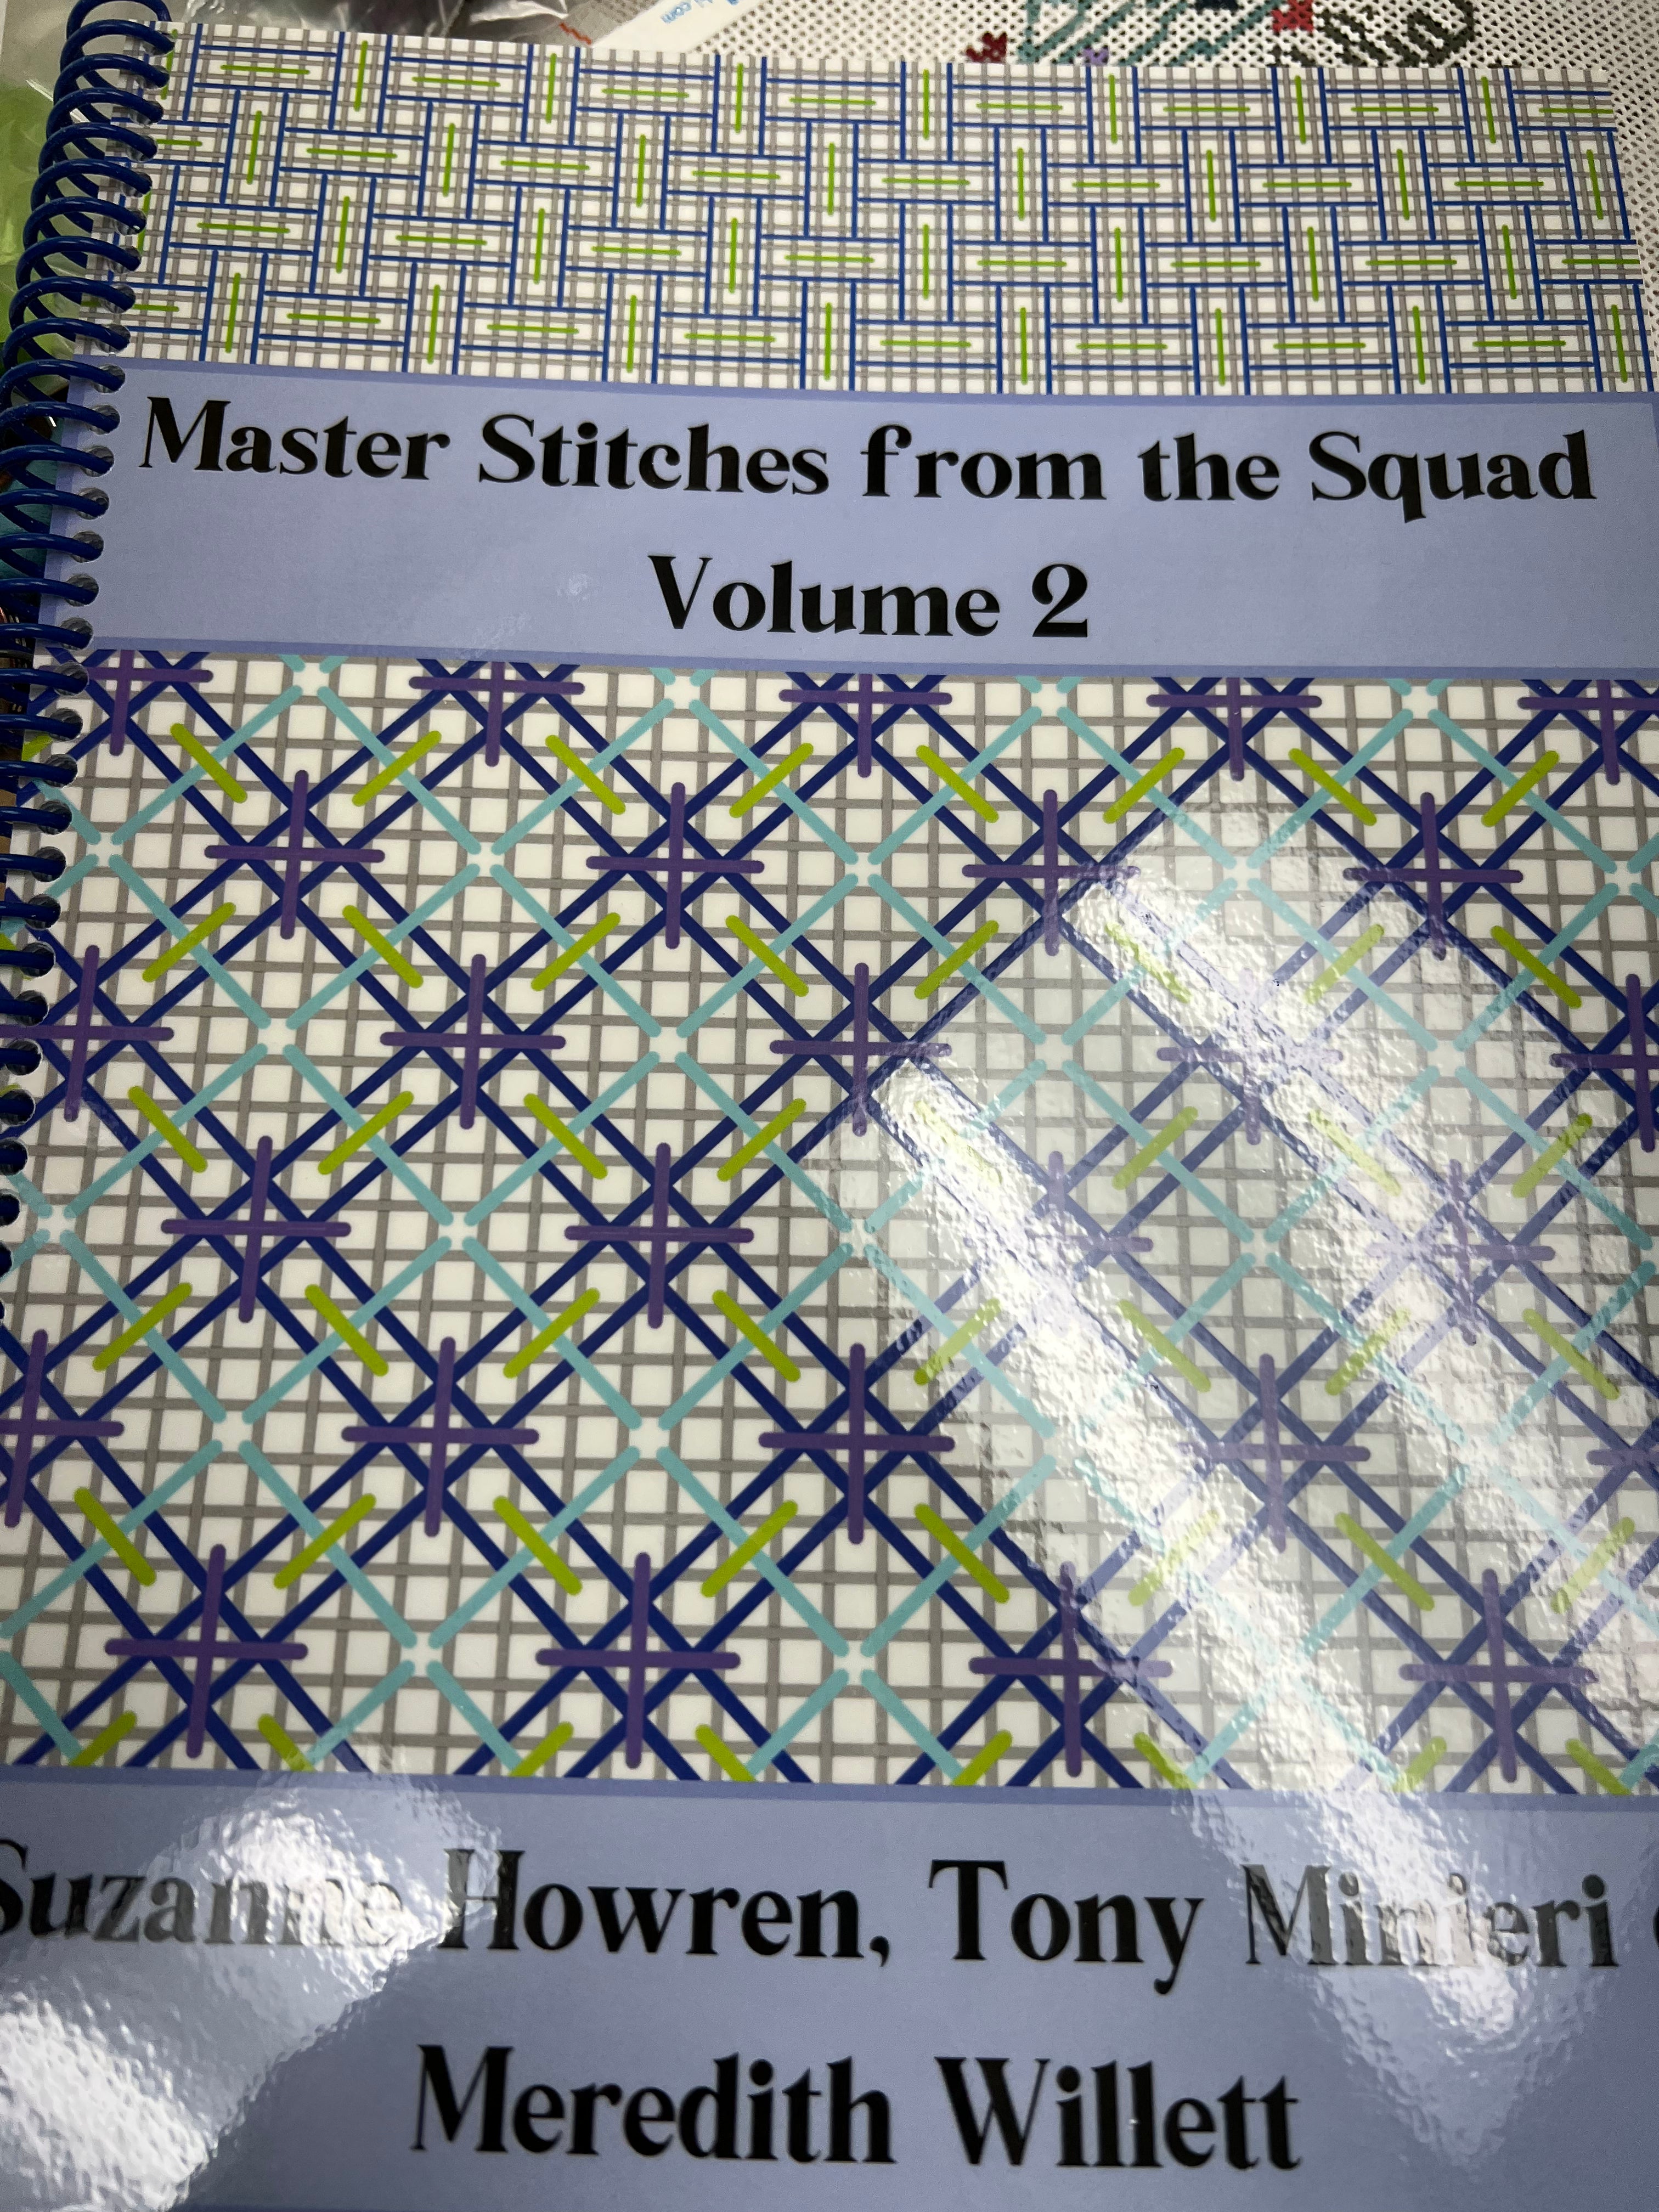 Master Stitchers from the Squad